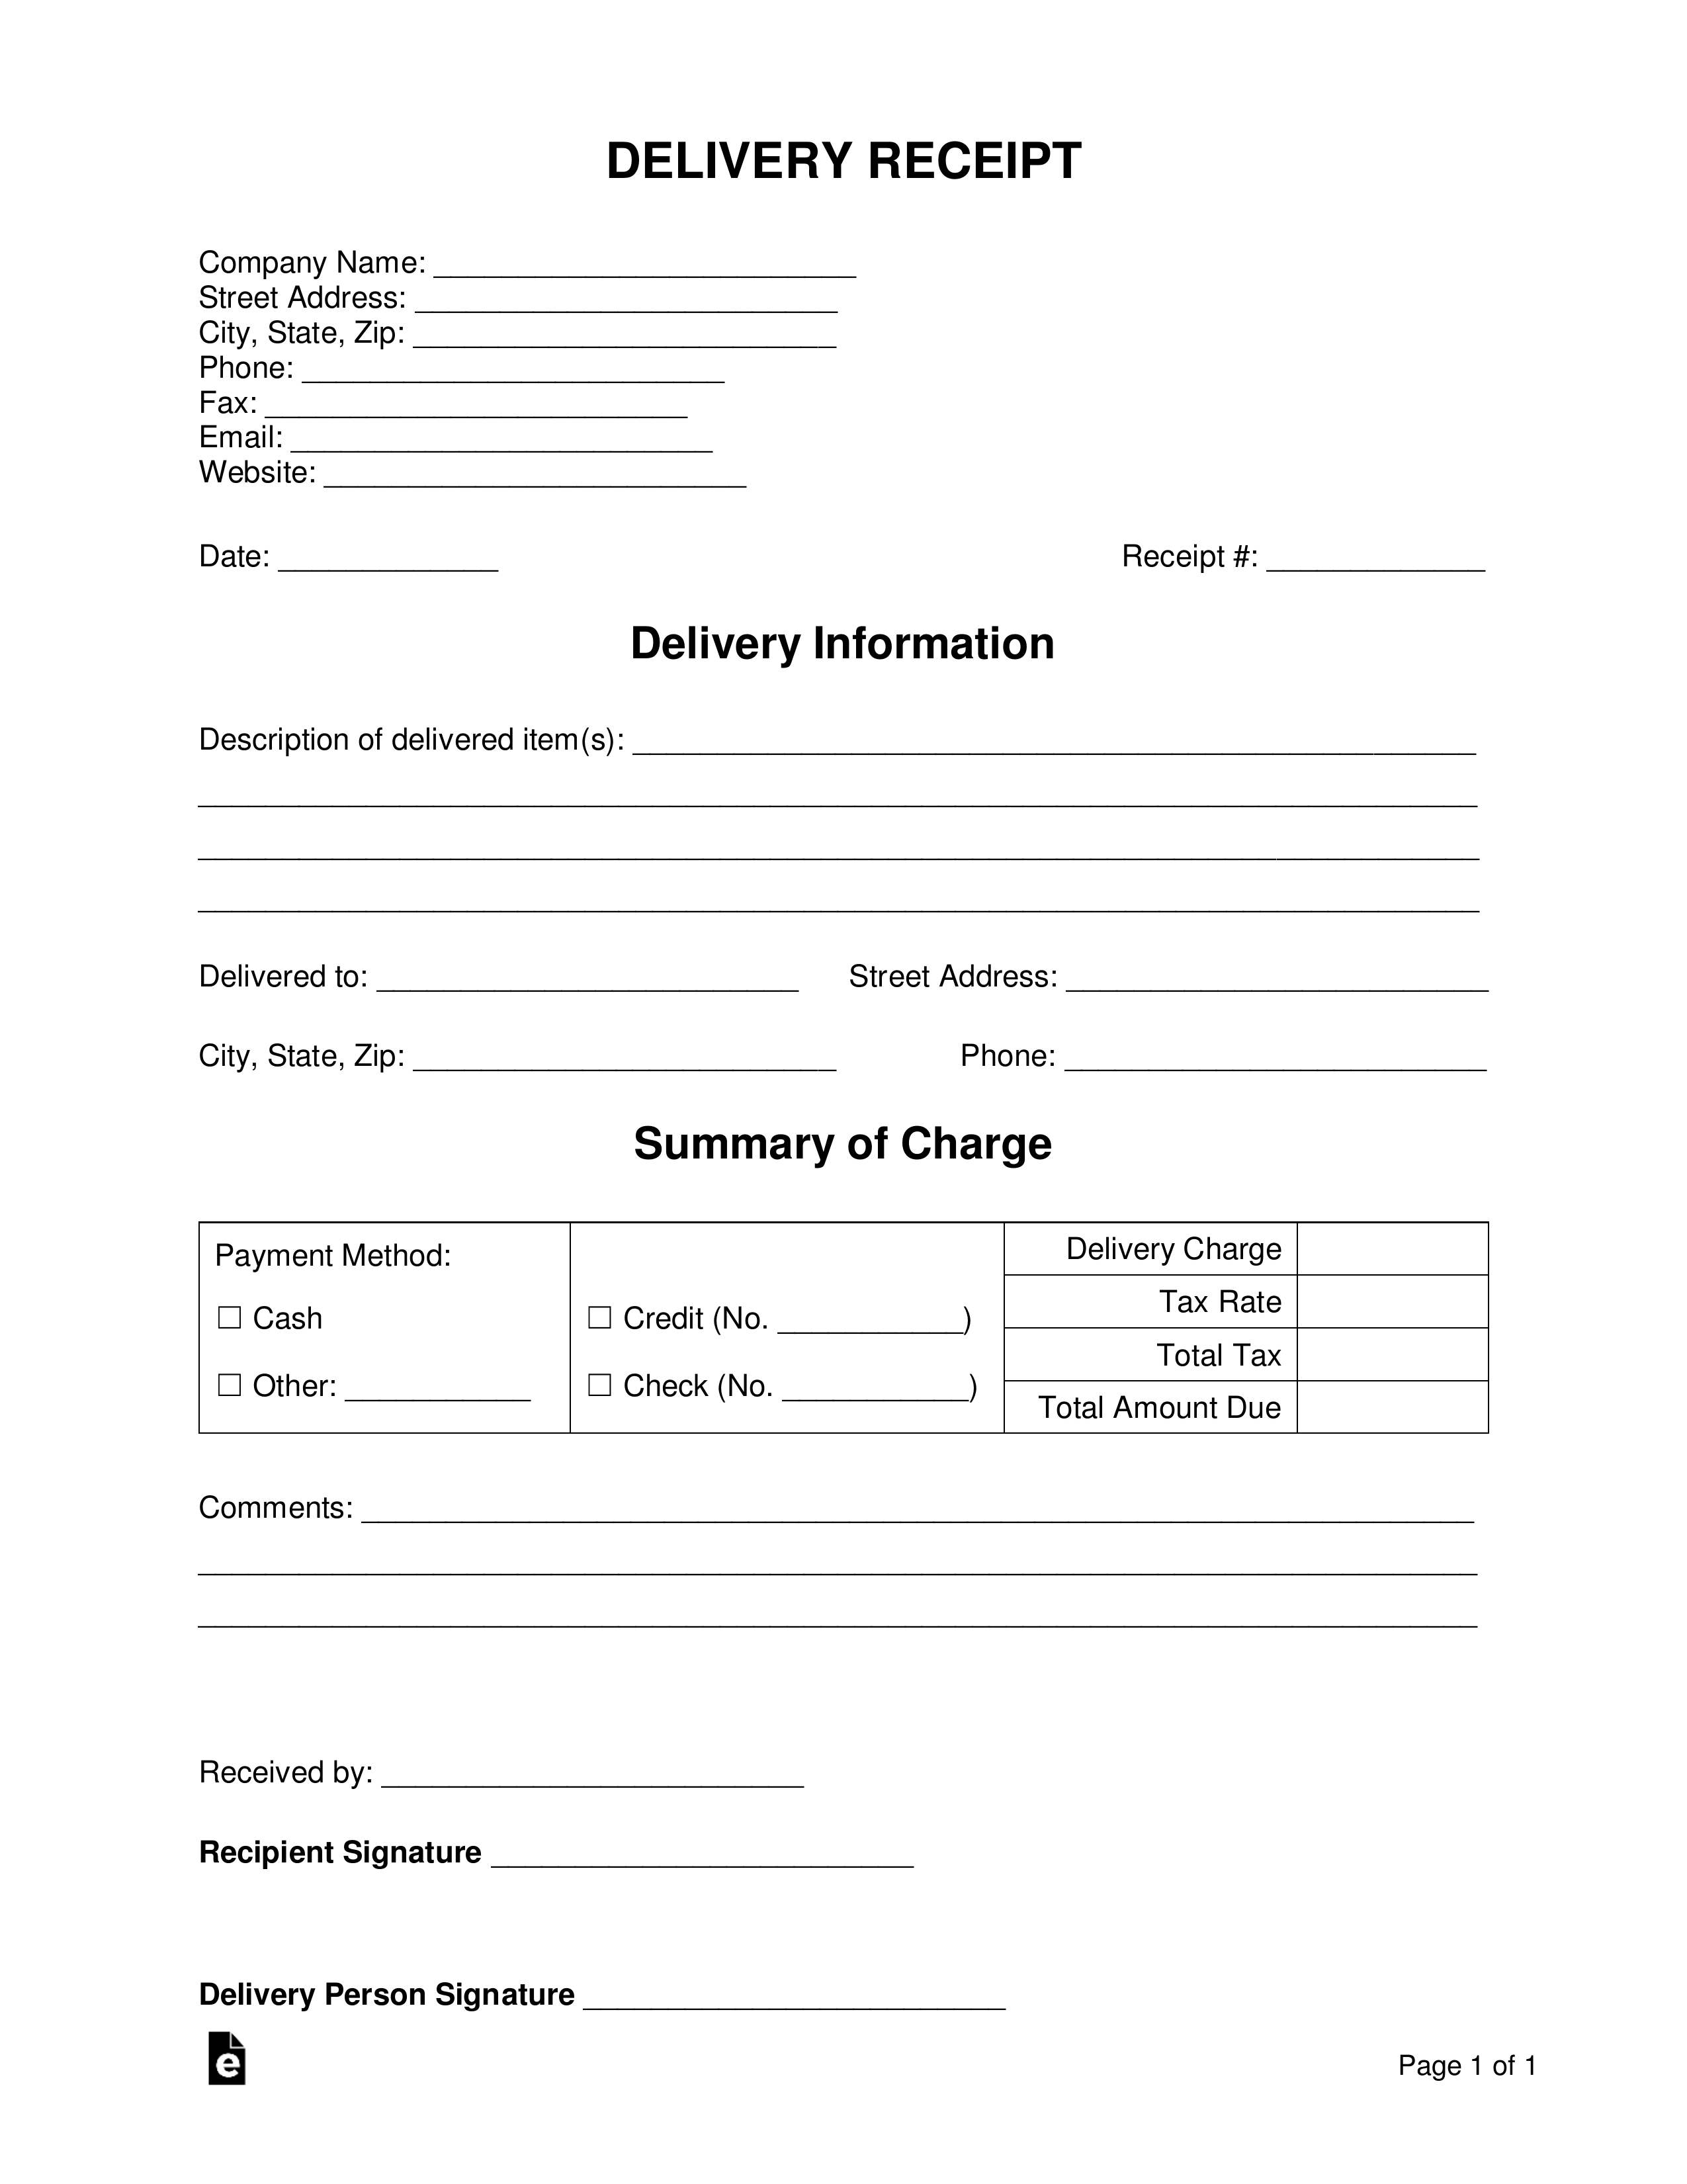 Free Delivery Receipt Template Word Pdf Eforms